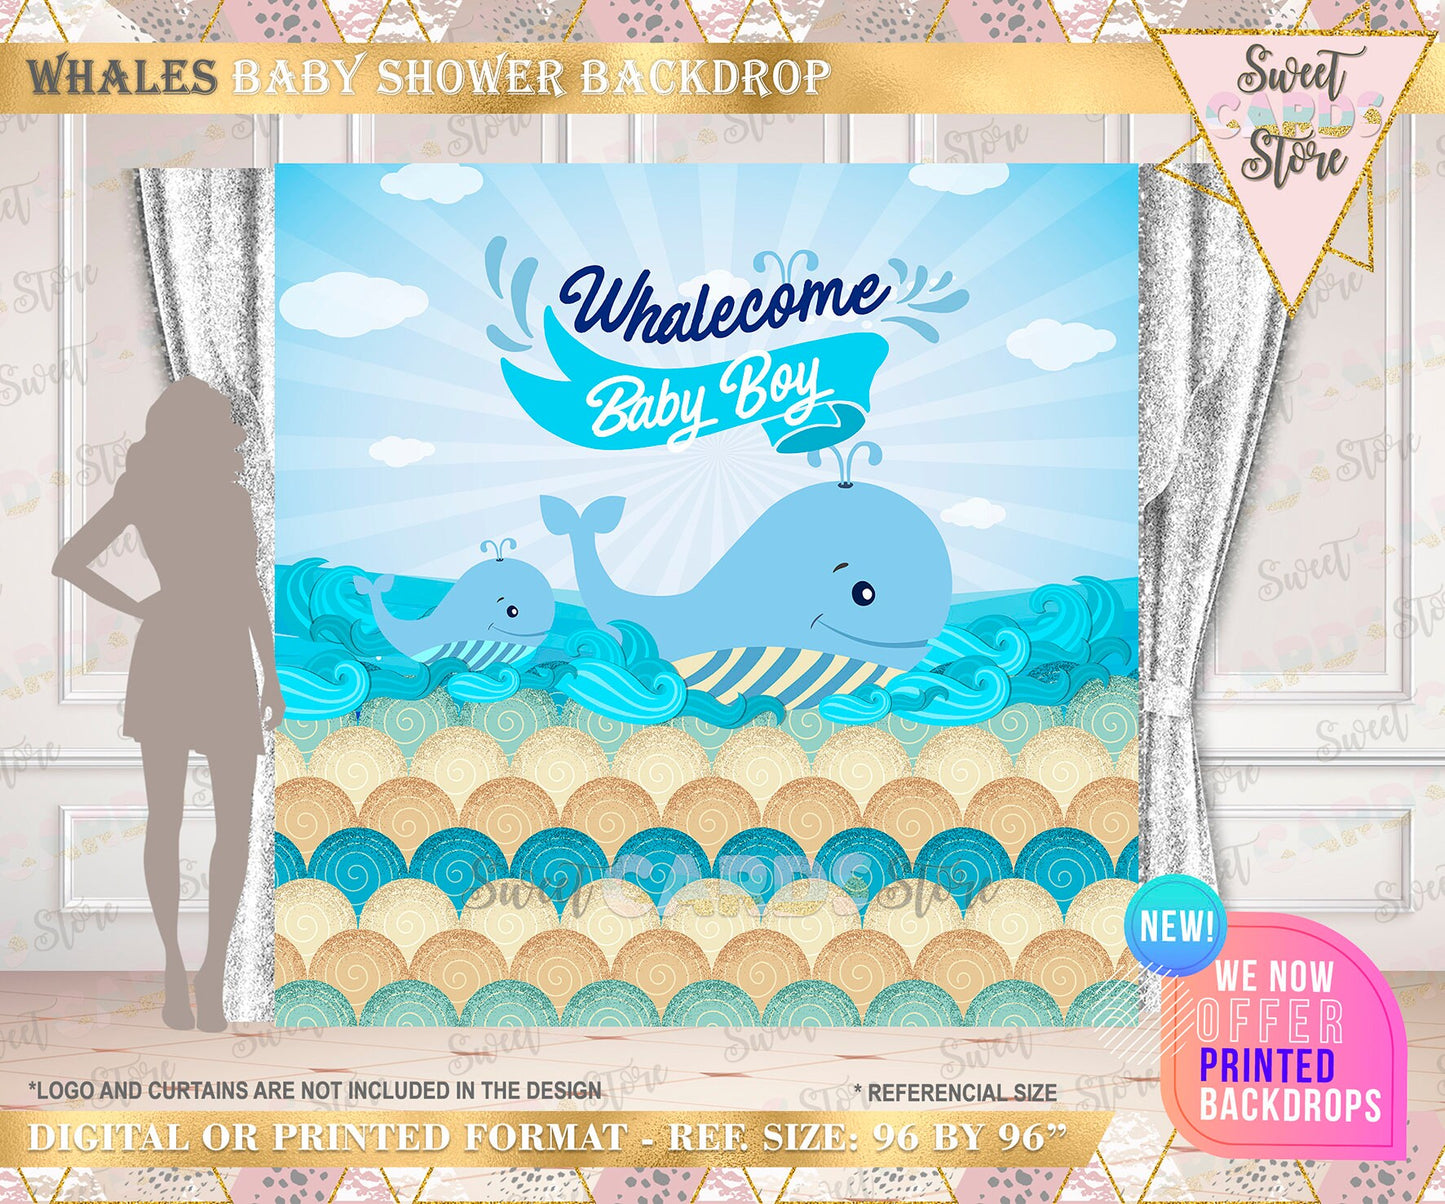 Whale baby shower backdrop, whales baby shower backdrop, nautical whales backdrop, whales banner, whales party decor, whales birthday party